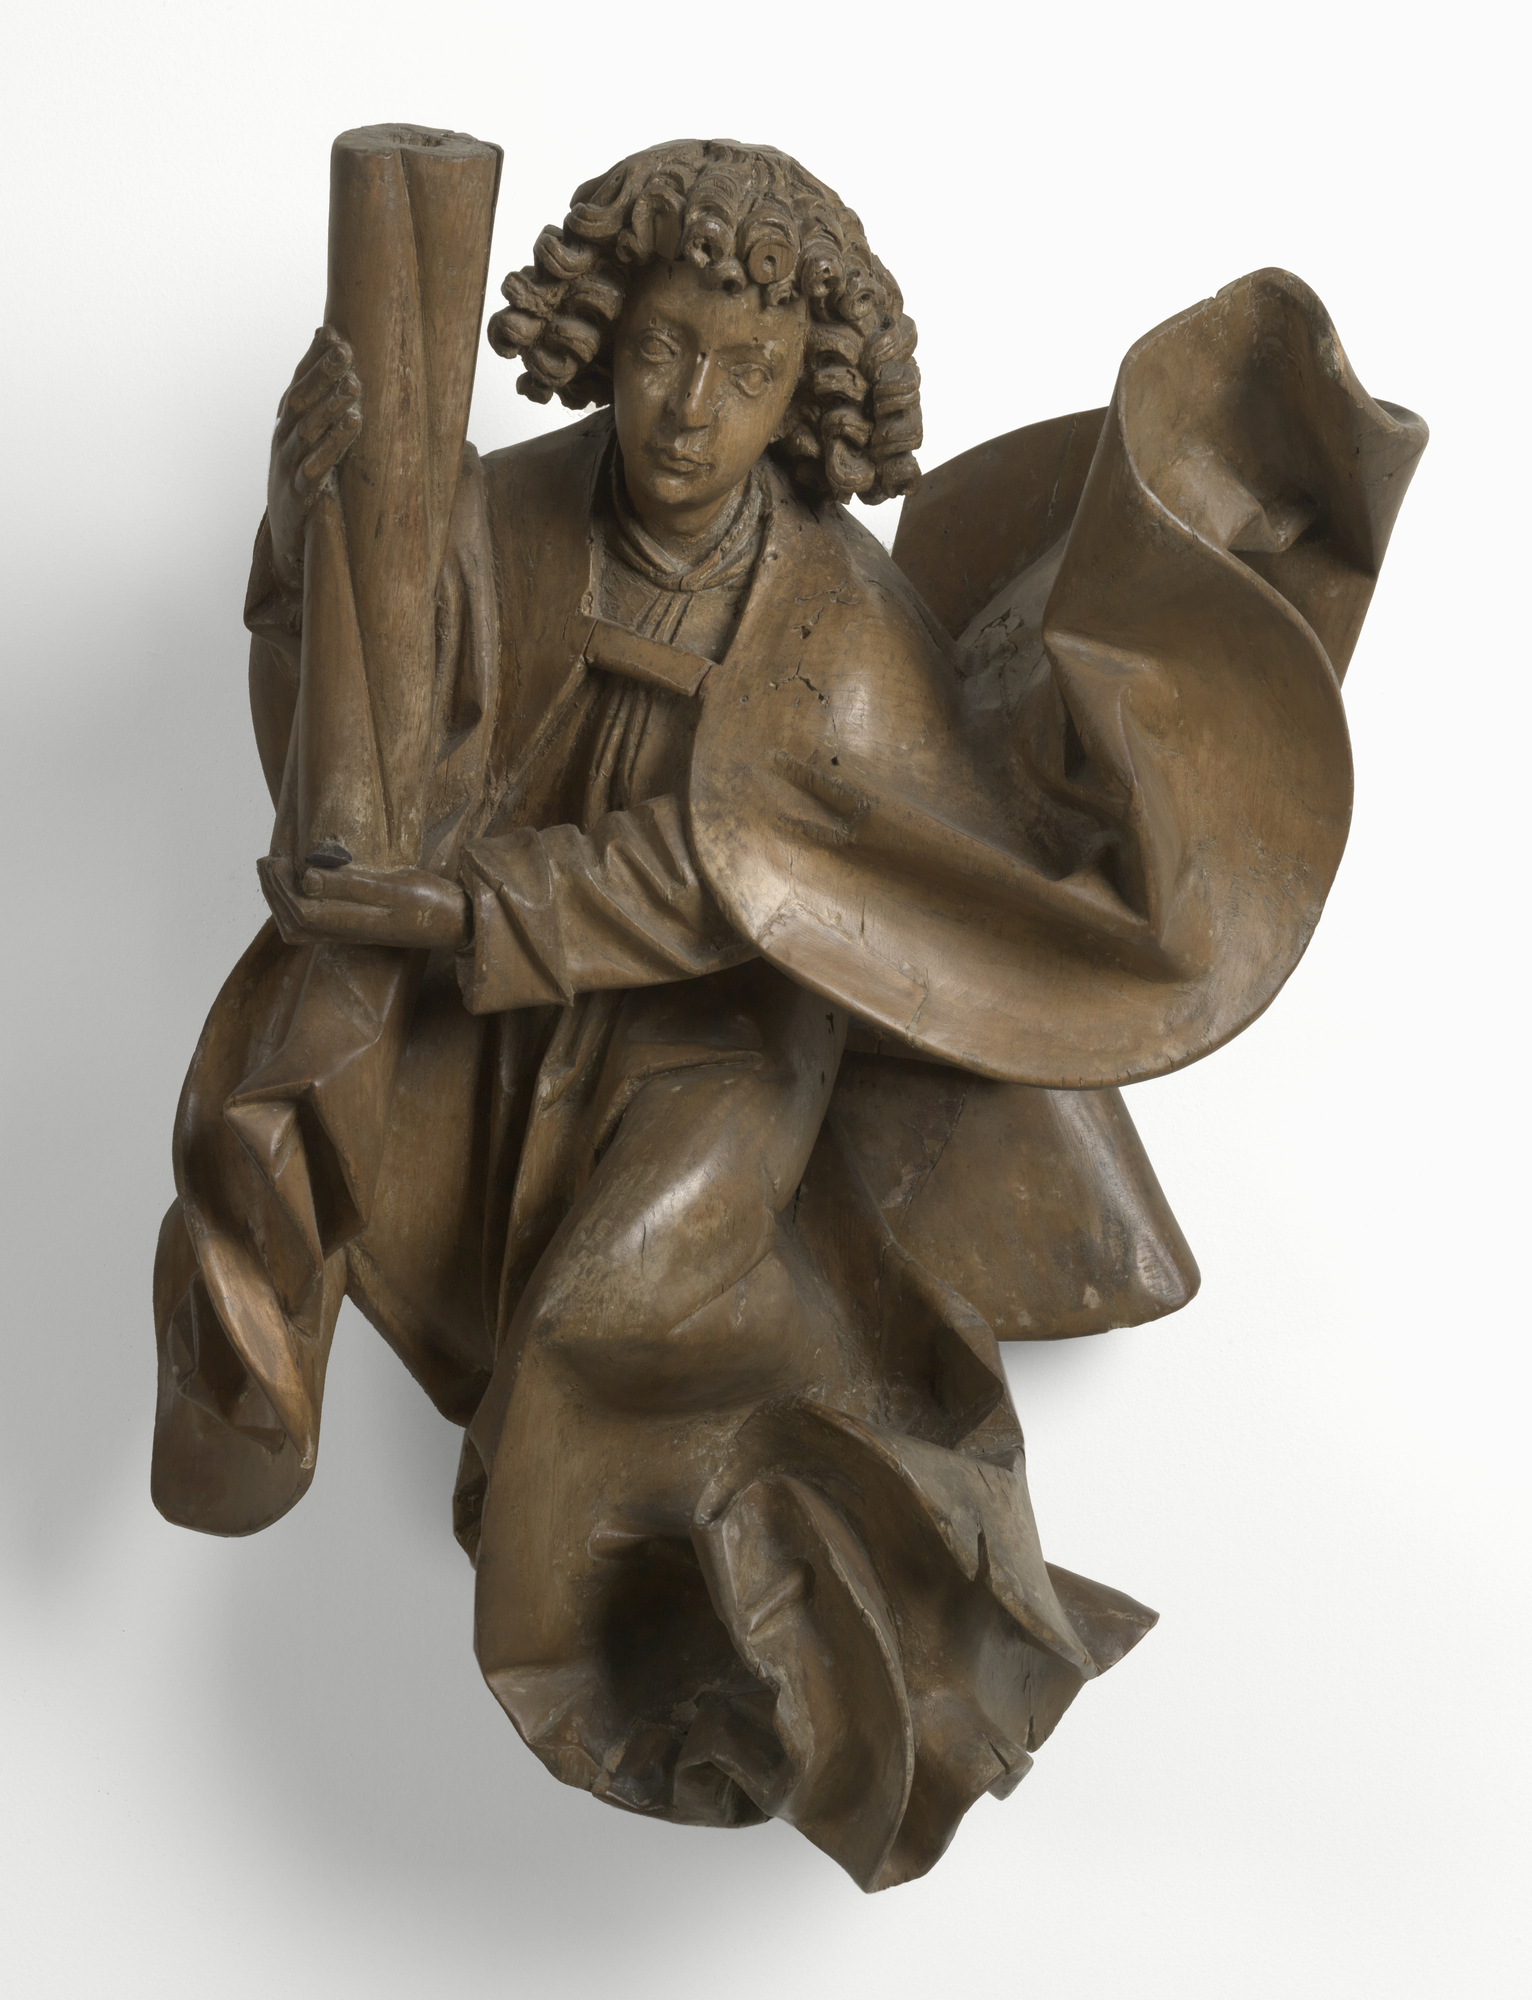 a wooden sculpture of an angel in robes caring a large column